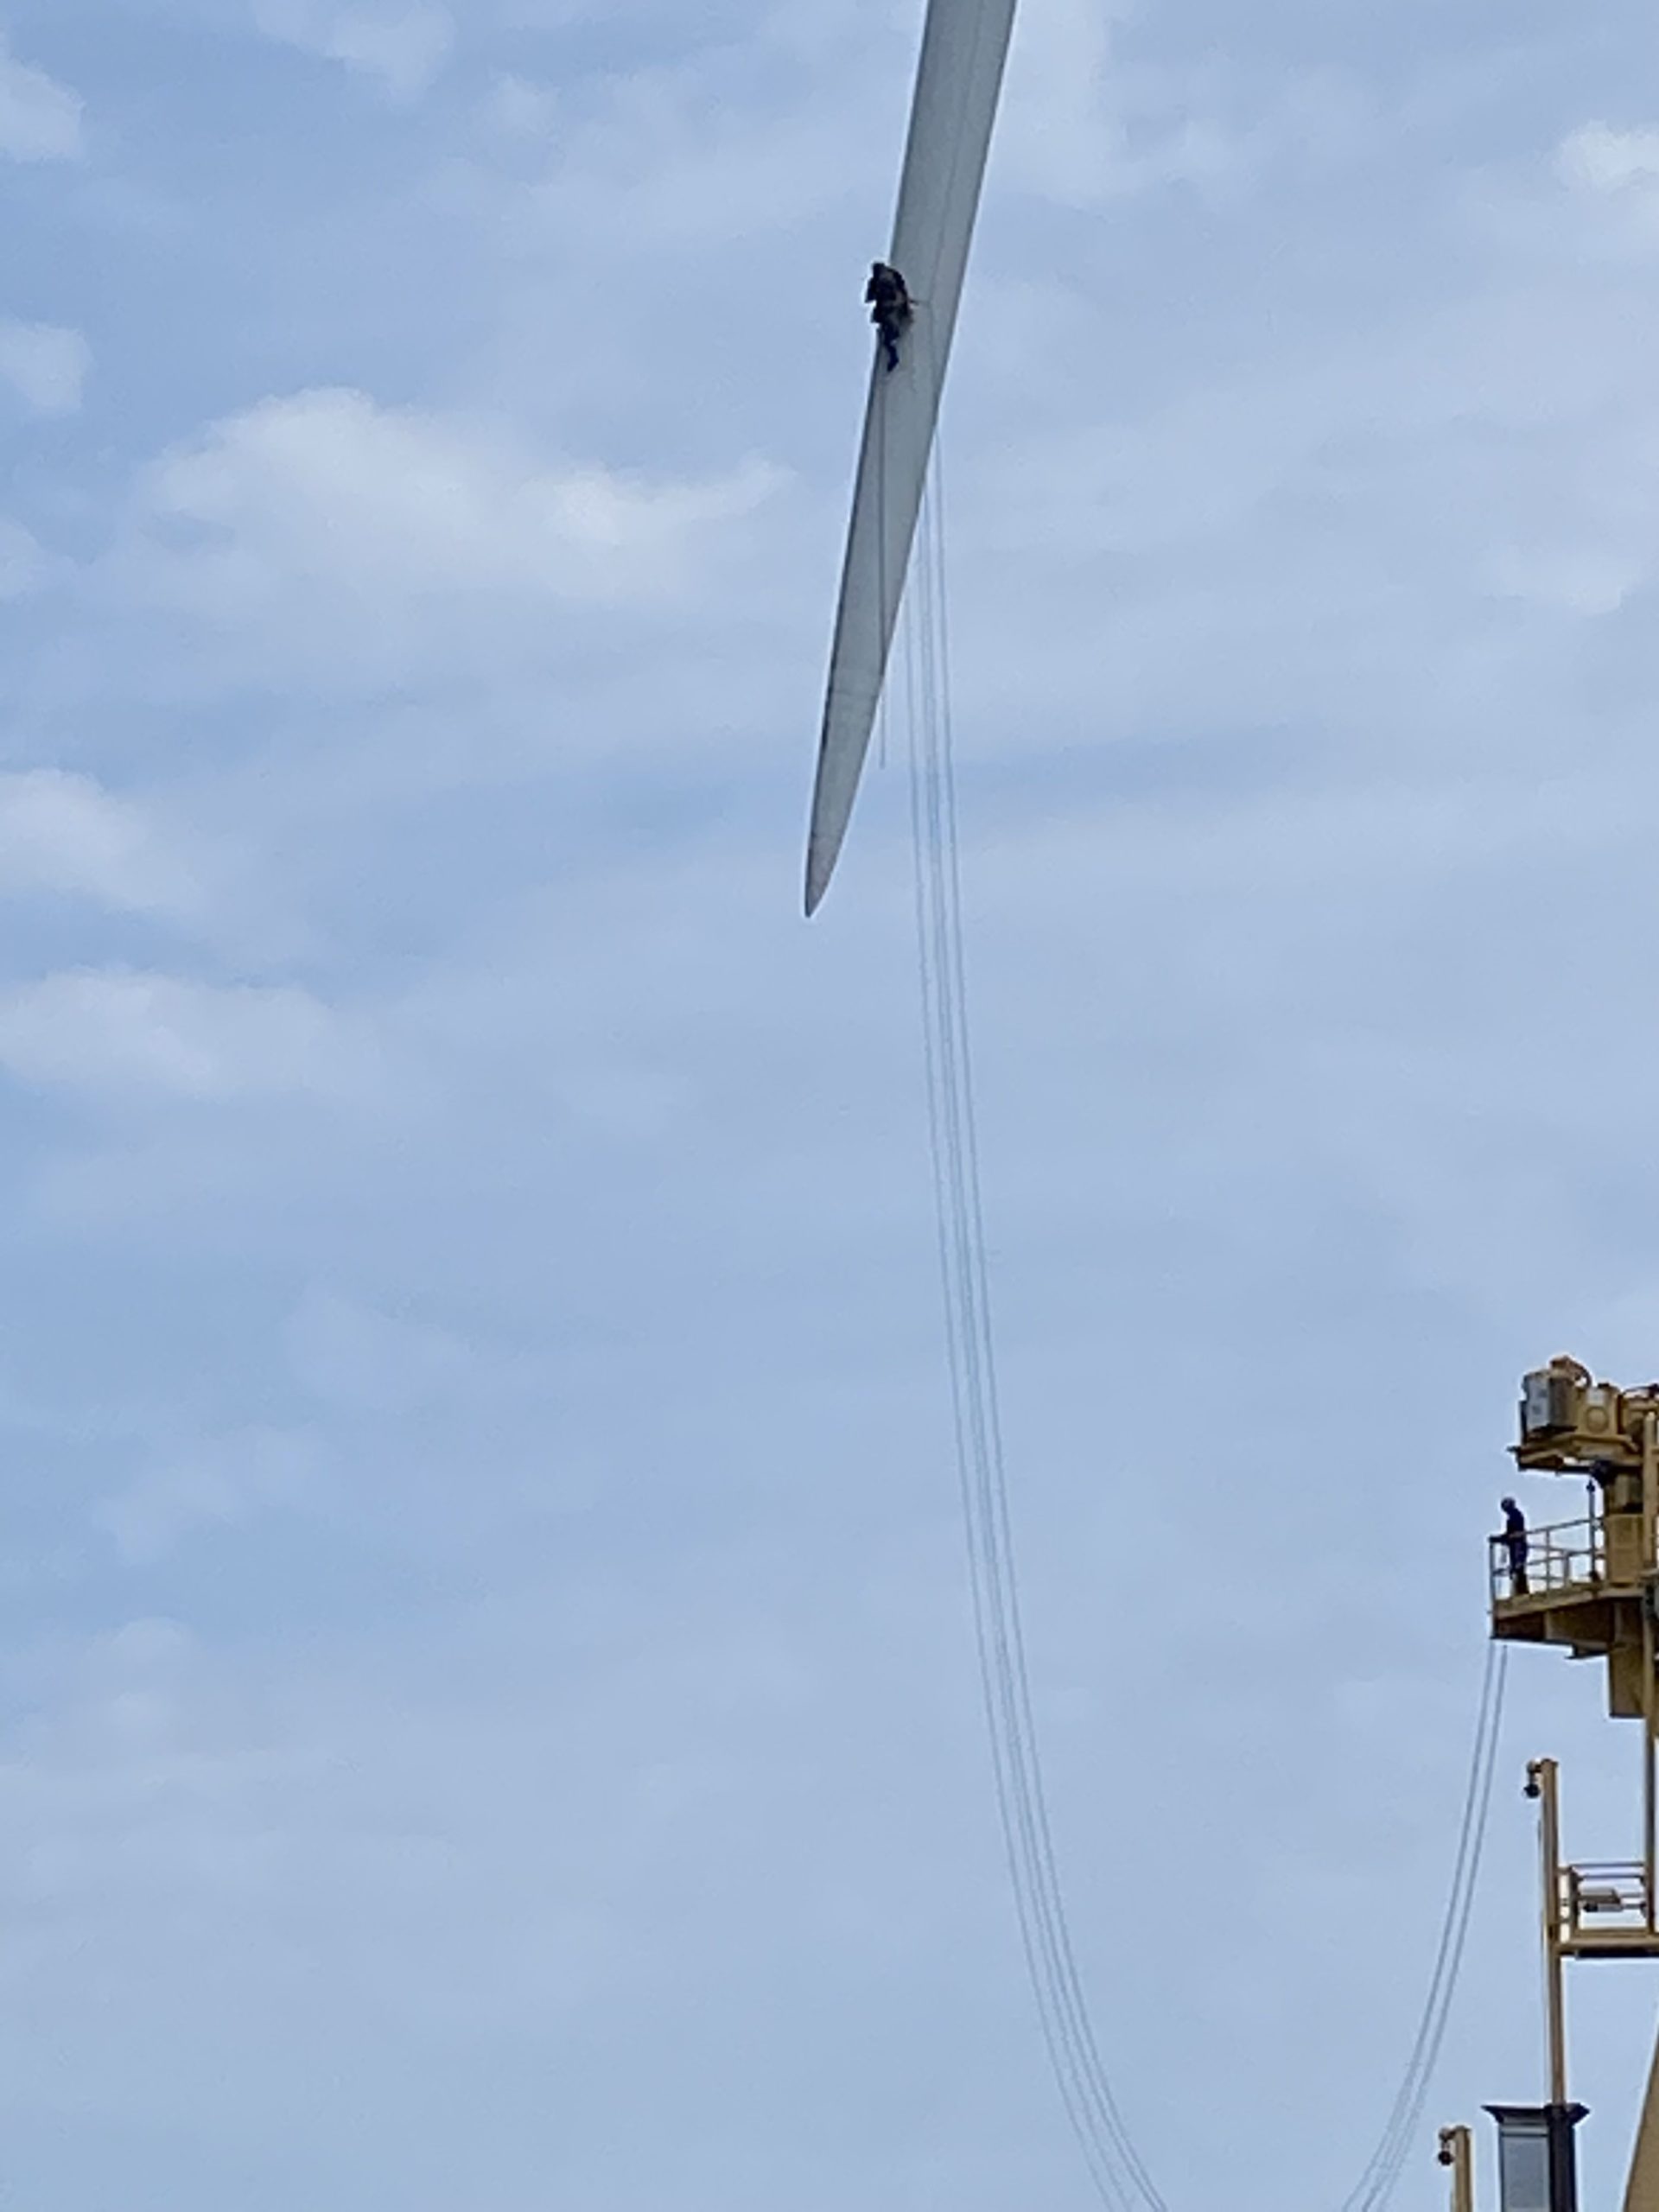 A maintenance worker on the tip of one of the 240-foot wind turbine blades at the Block Island Wind Farm. An Orsted spokesperson said that the blade maintenance is routine and not part of the structural issues that have forced the wind farm to shut down operations this summer.